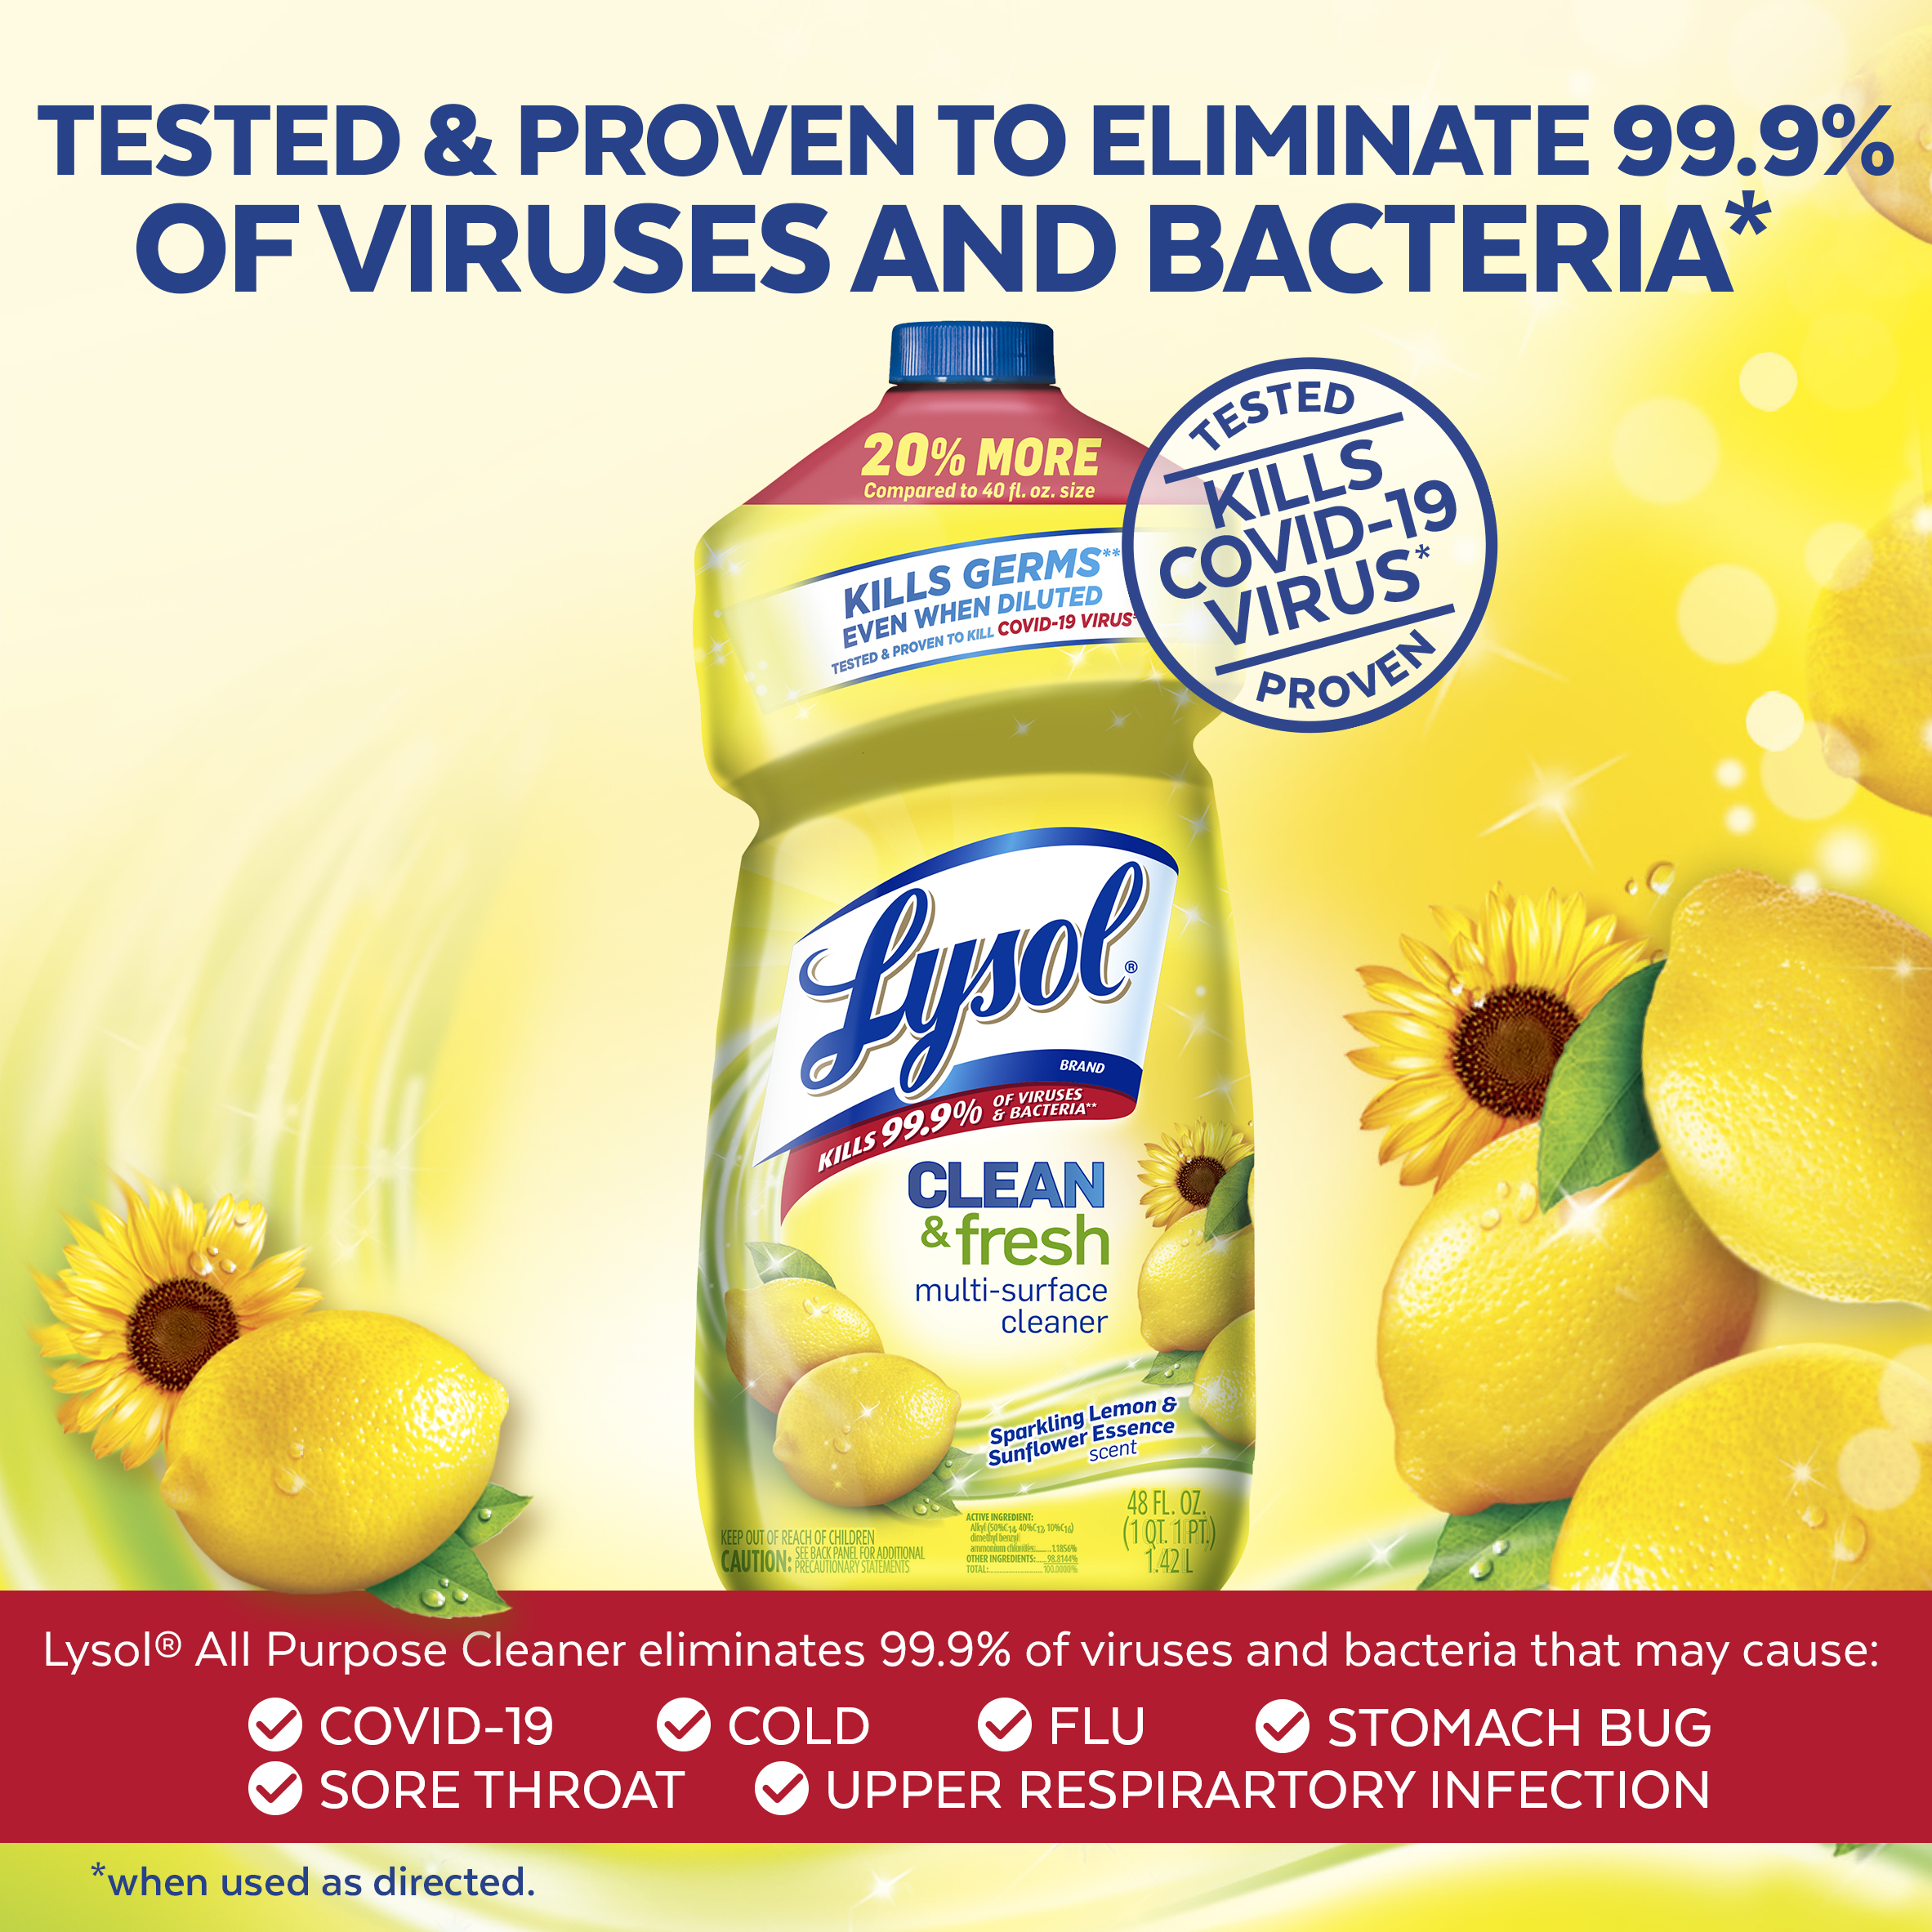 Lysol Multi-Surface Cleaner, Sanitizing and Disinfecting Pour, to Clean and Deodorize, Sparkling Lemon & Sunflower Essence, 48oz - image 3 of 6